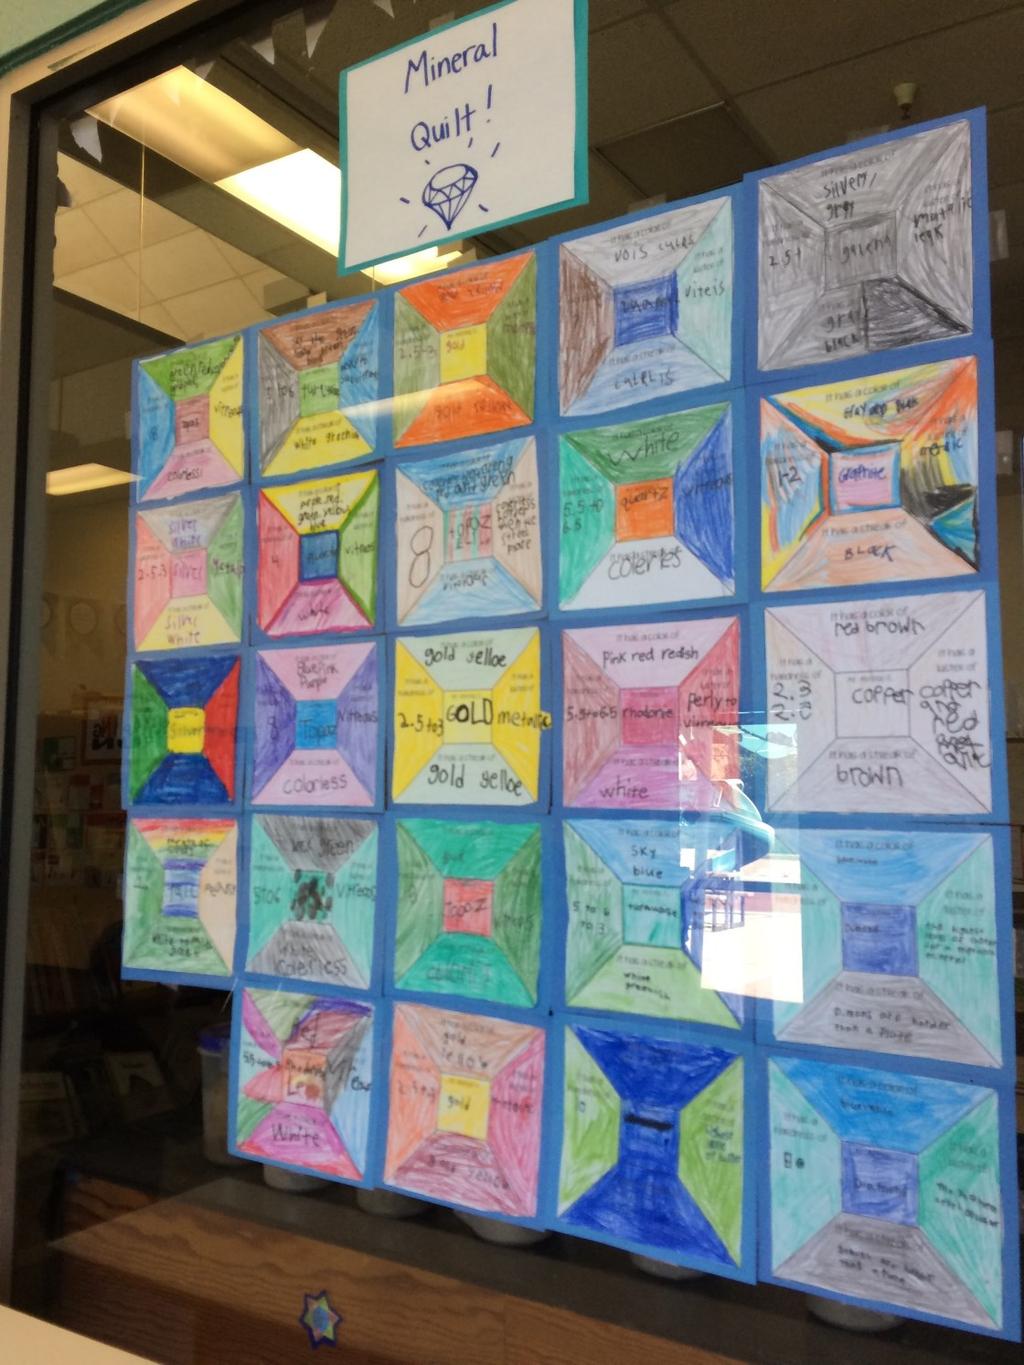 After the research was complete, students chose their favorite mineral to make their quilt square. It was definitely a favorite activity from our science unit!